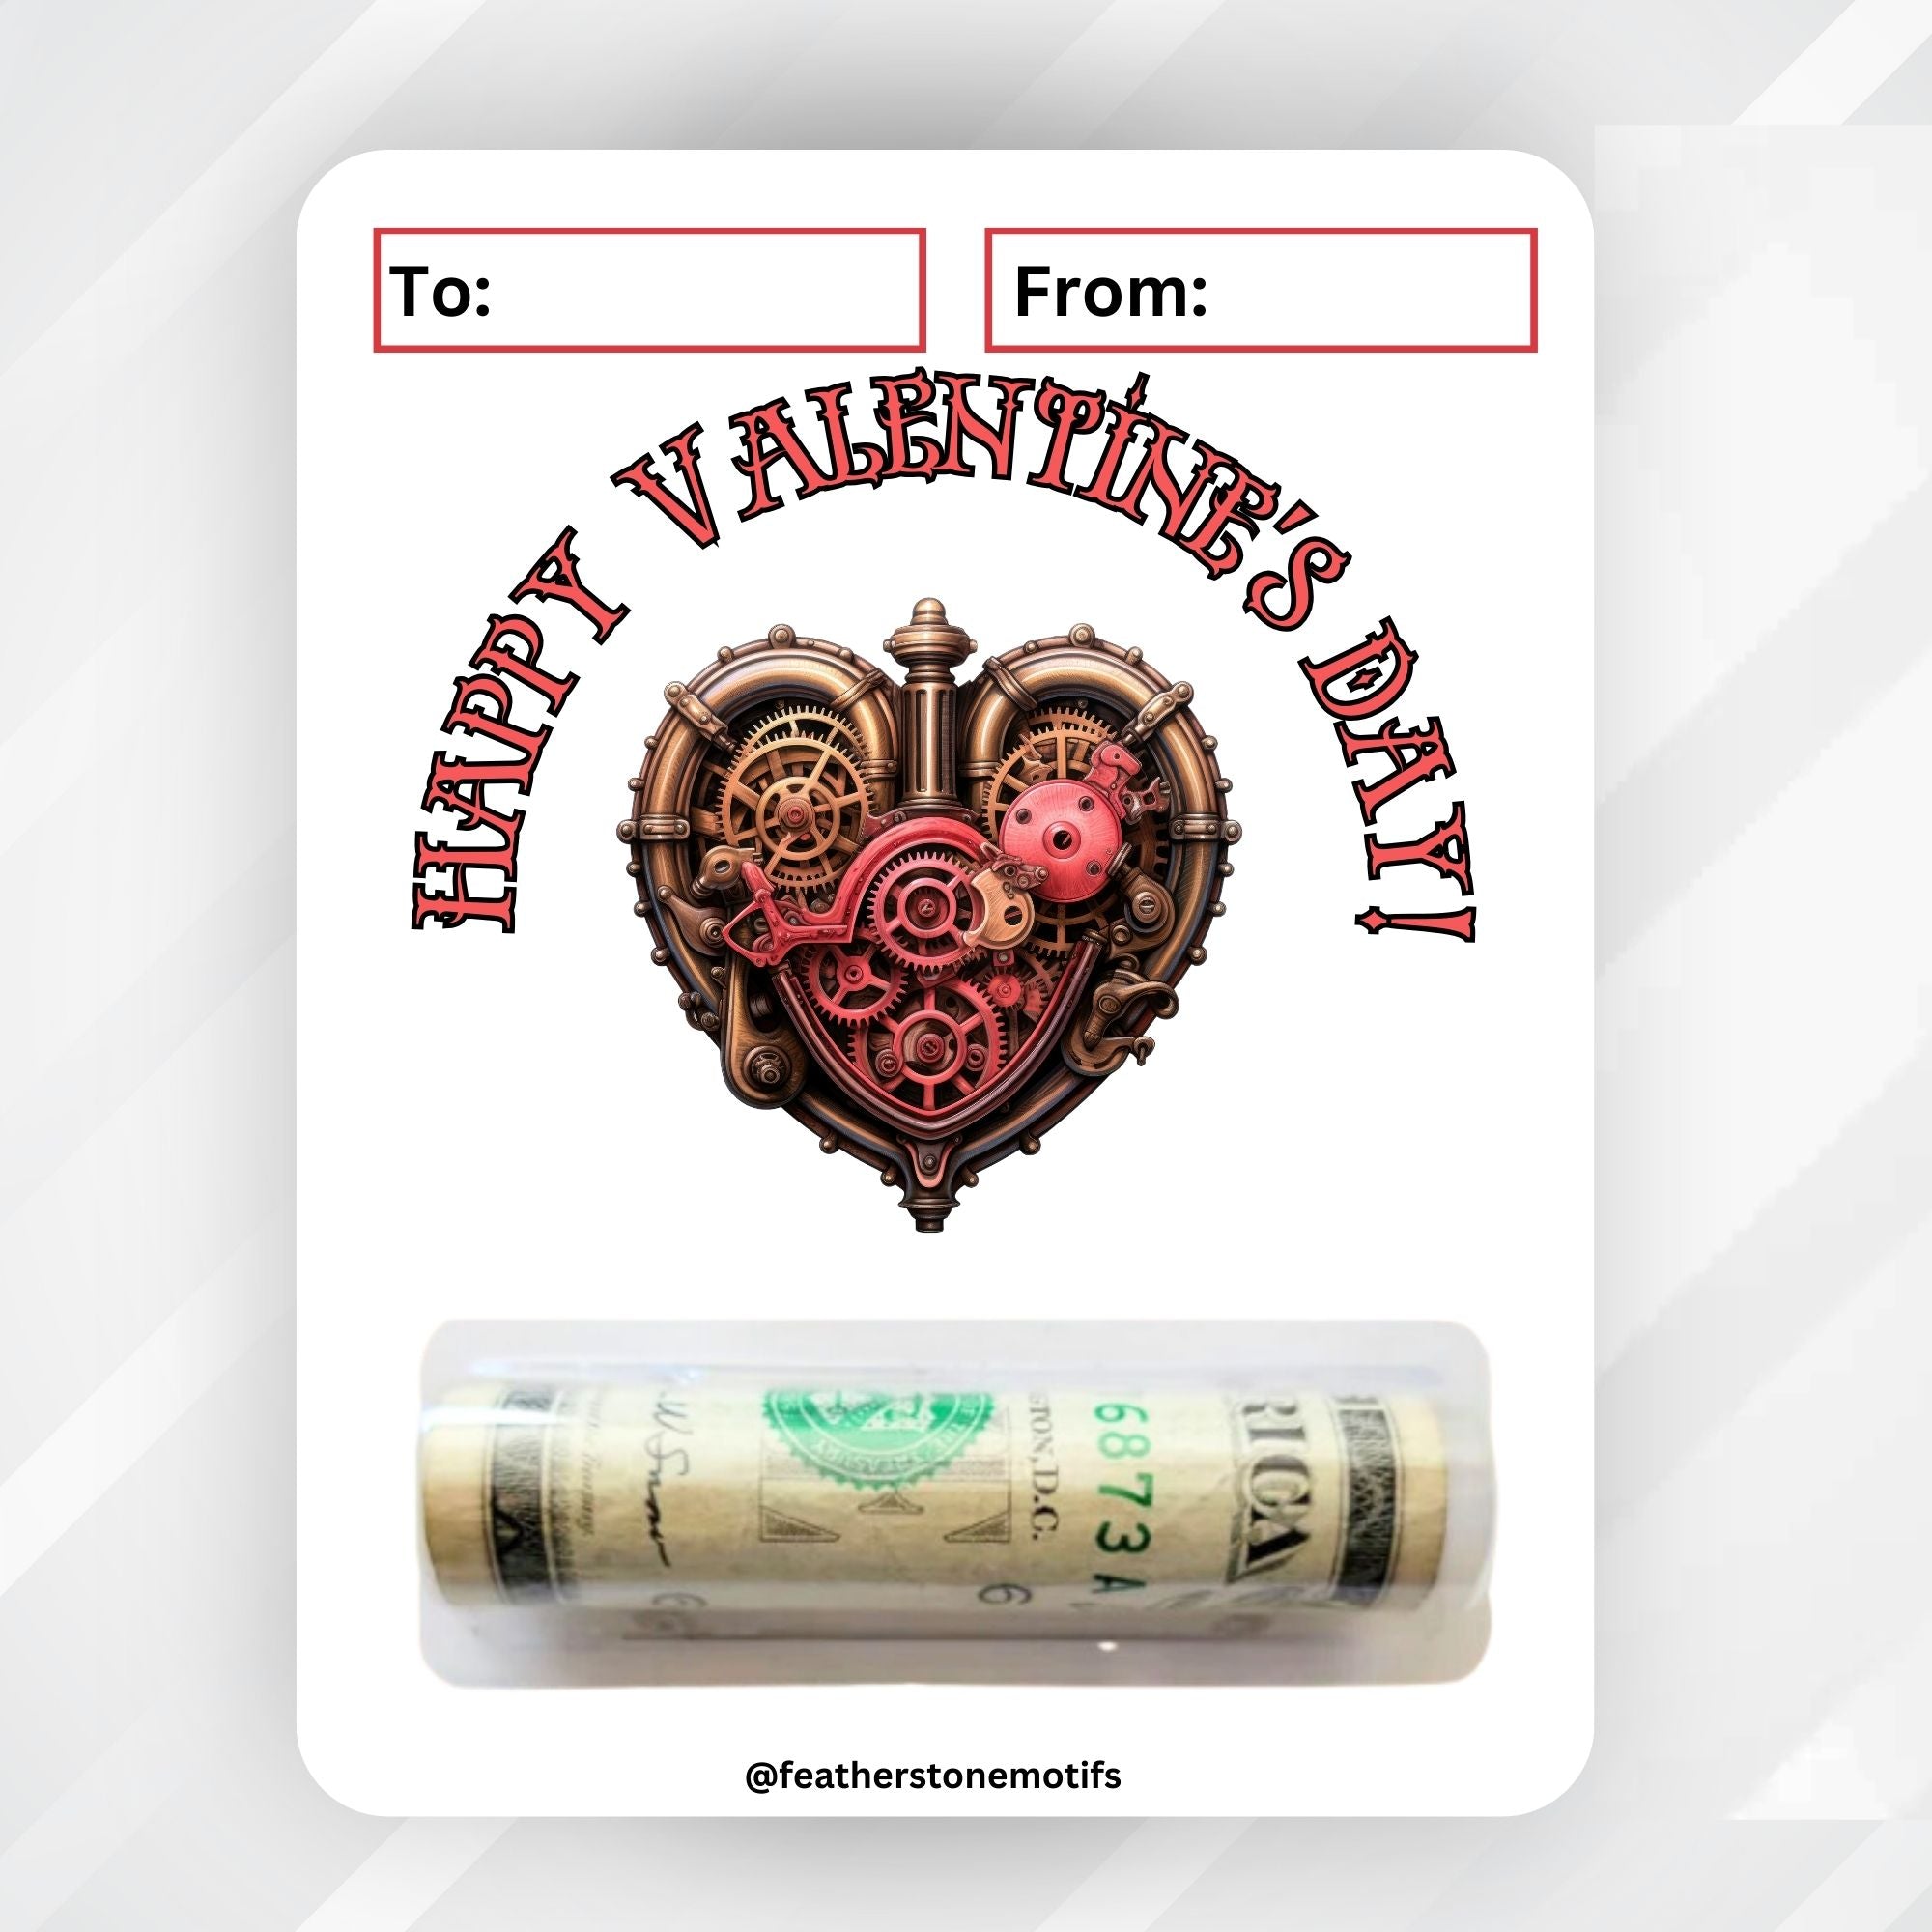 This image shows the money tube attached to the Steampunk Heart Valentine Money Card.